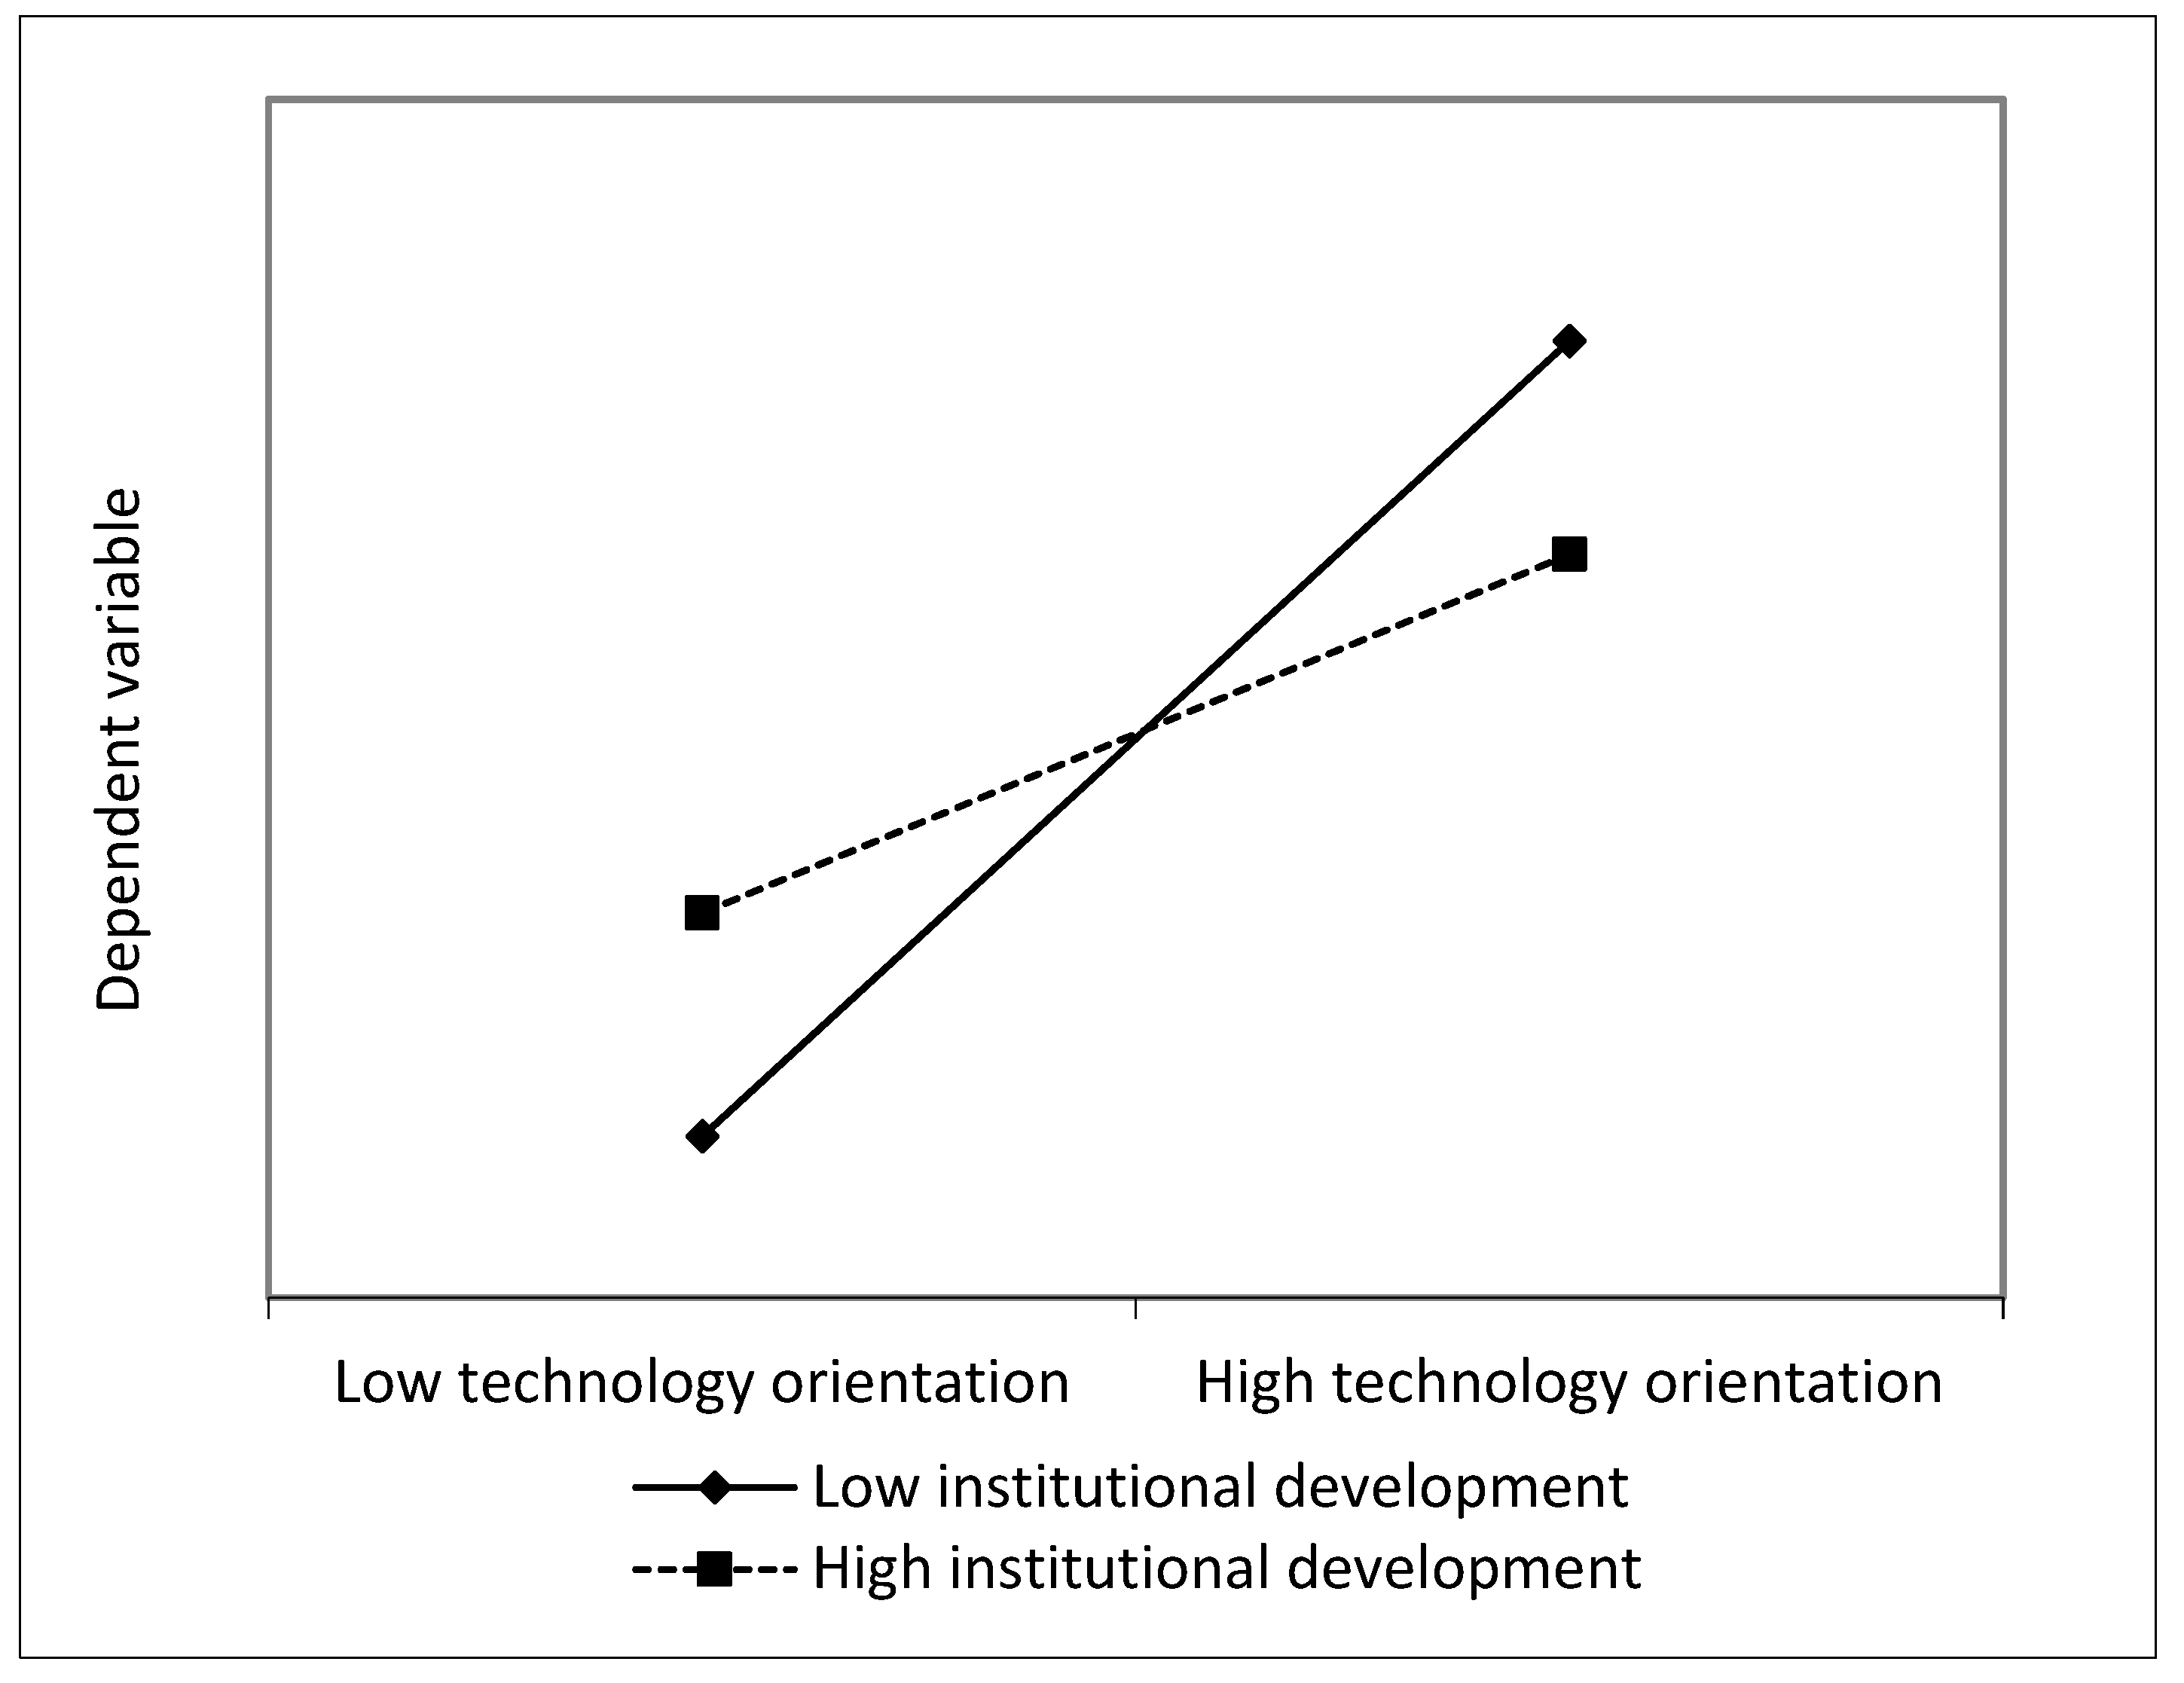 Sustainability | Free Full-Text | Effects of Sustainability and Technology  Orientations on Firm Growth: Evidence from Chinese Manufacturing